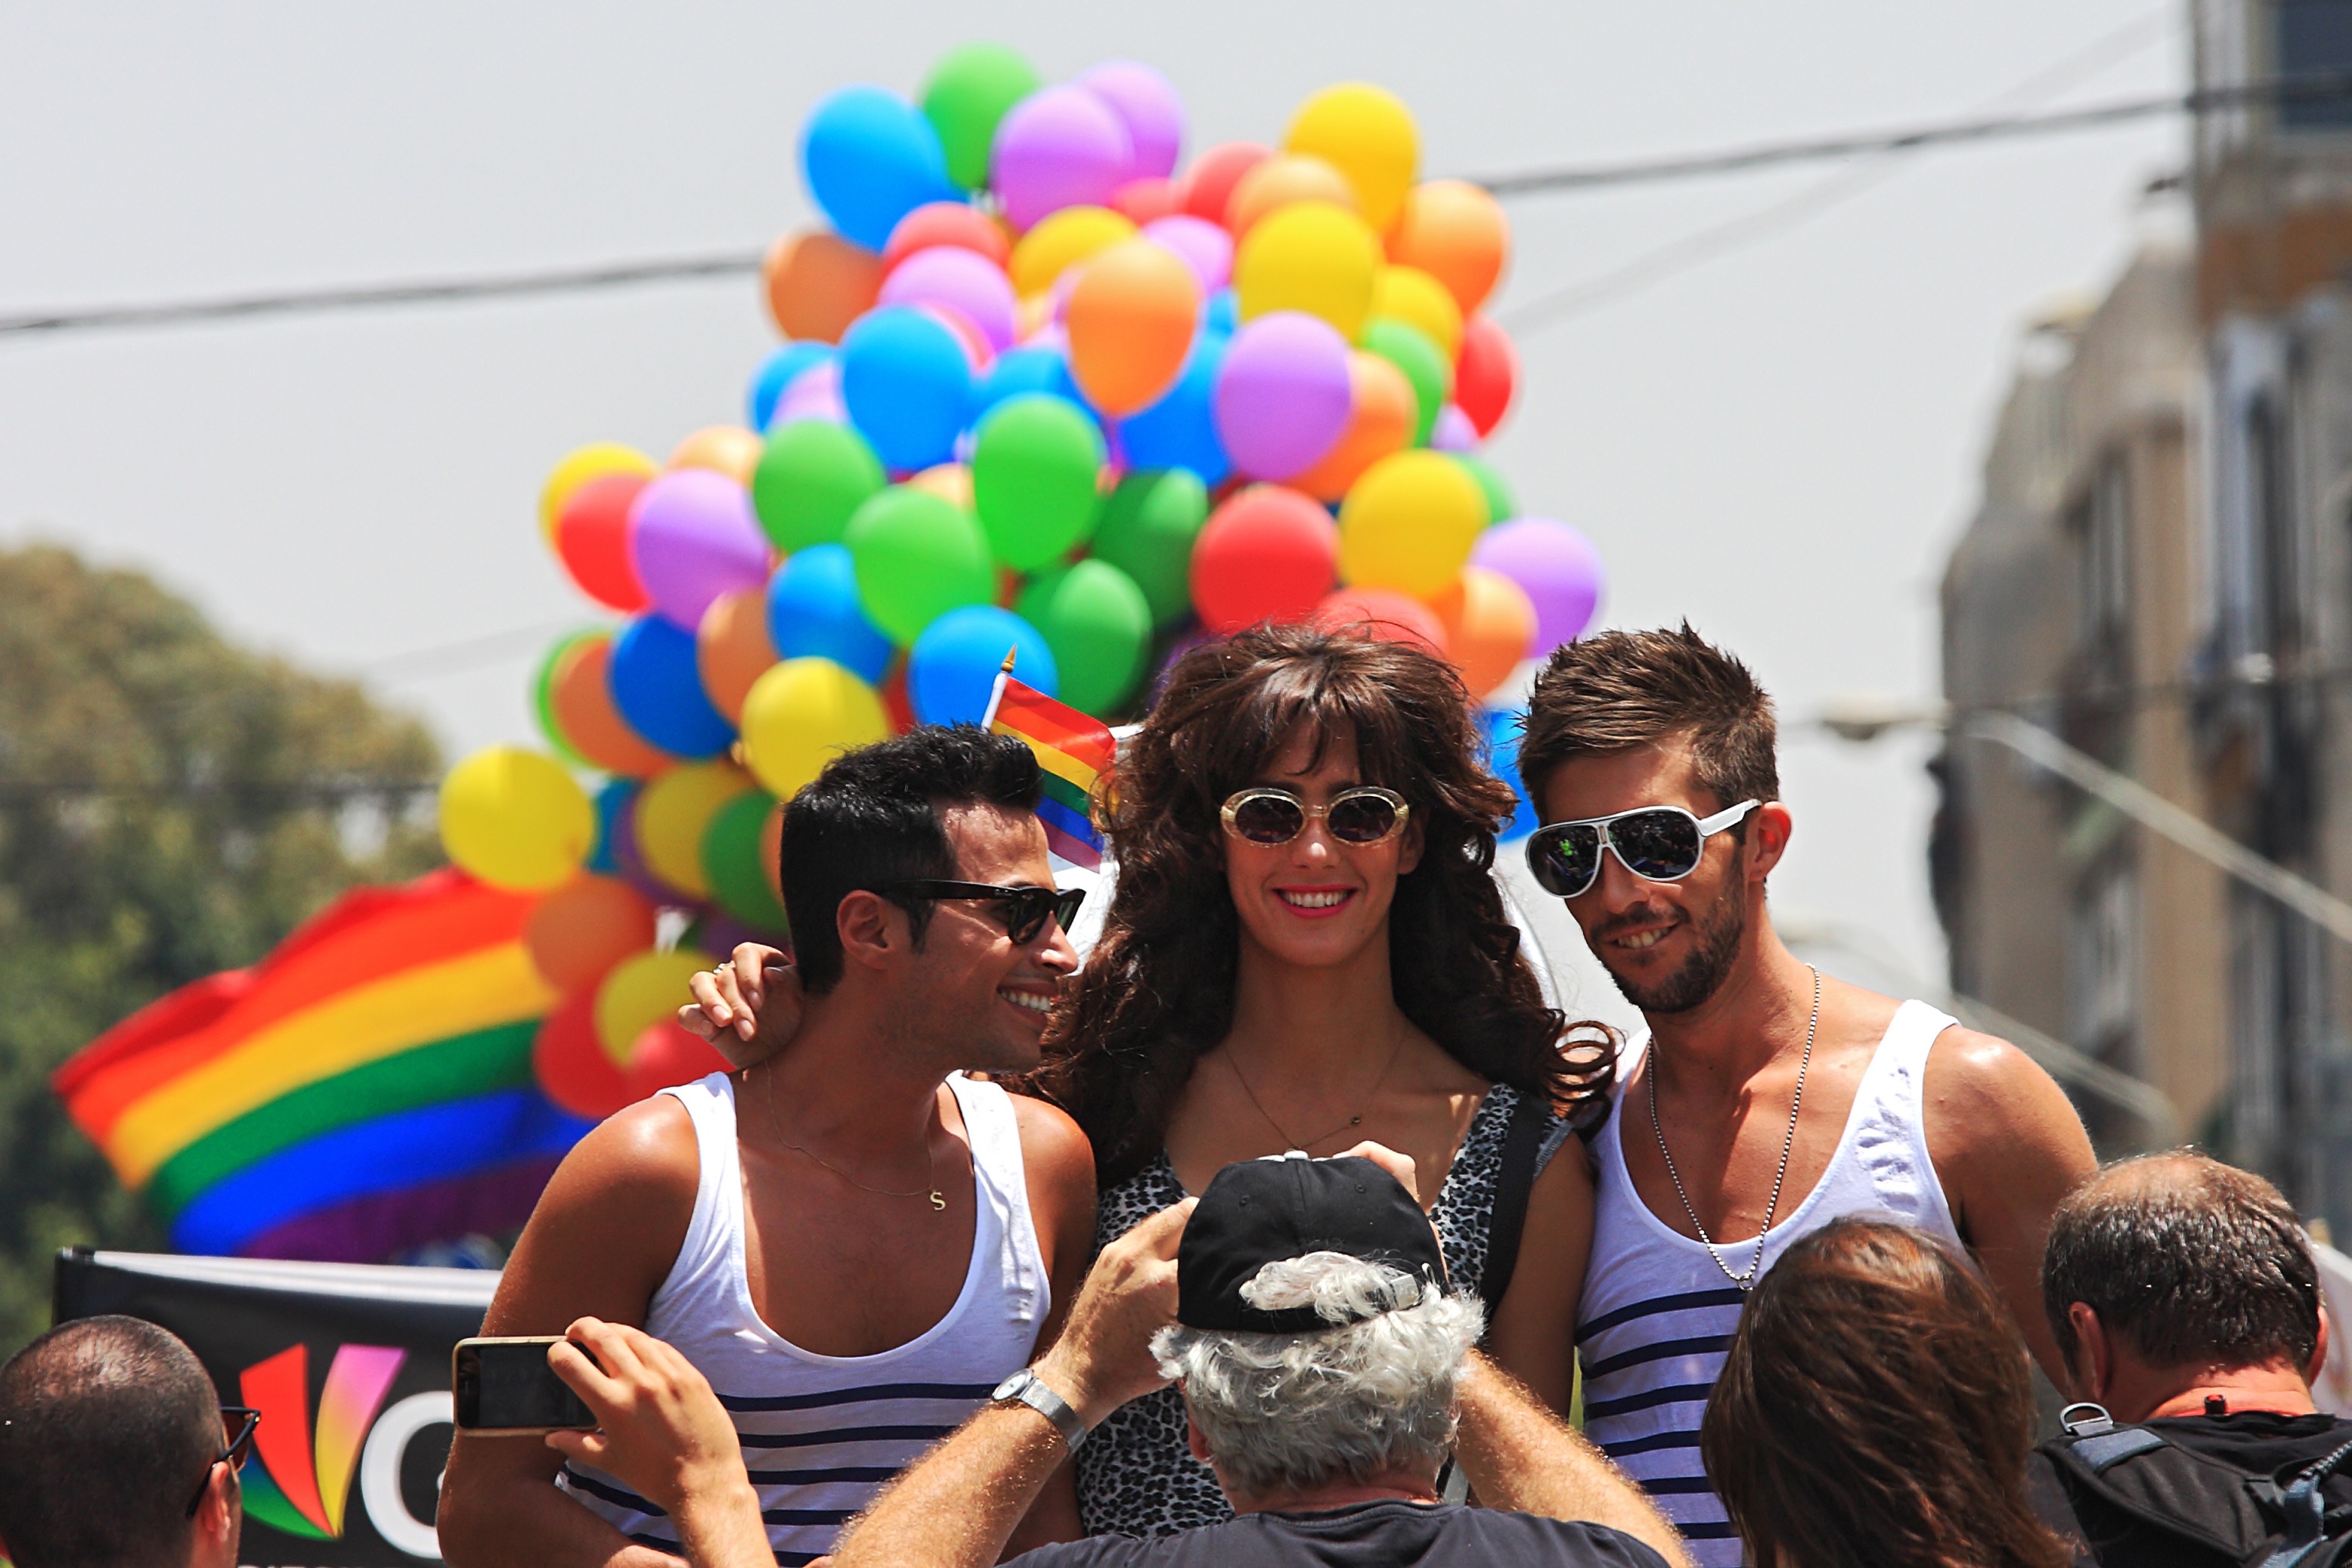 Witness one of the biggest pride celebrations in the world - Tel Aviv Pride Parade 2019